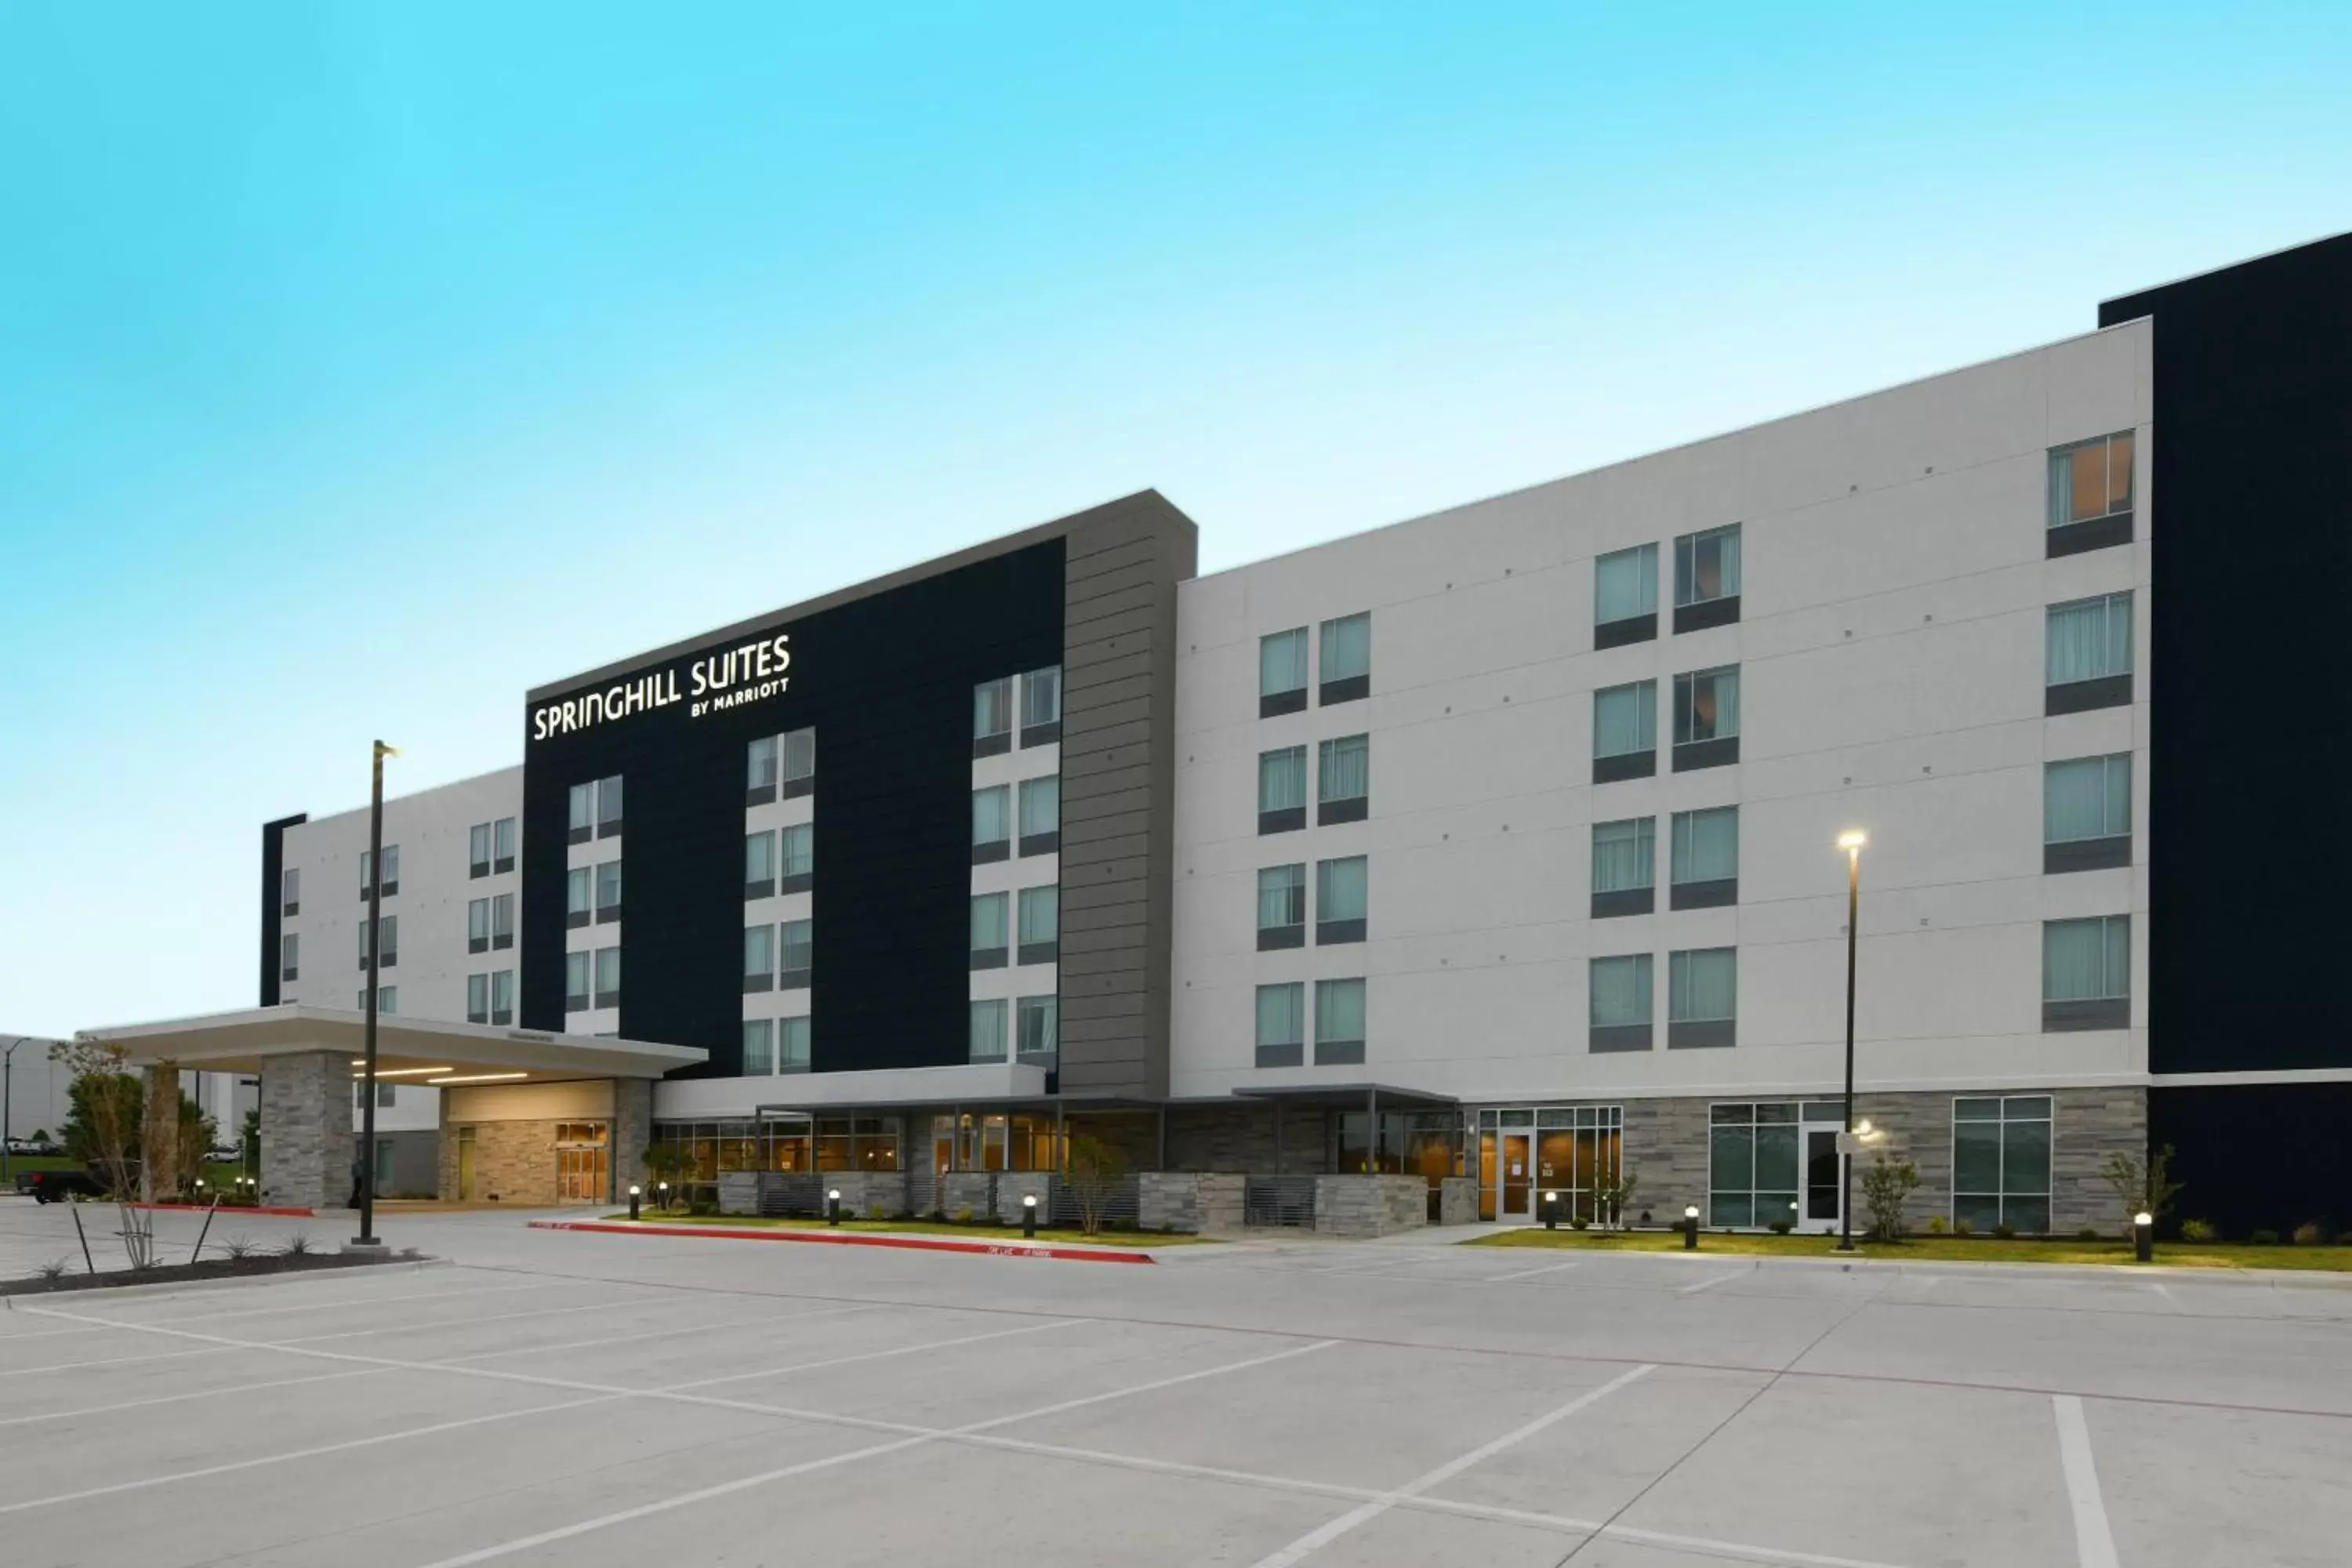 Property Building in SpringHill Suites Dallas DFW Airport South/CentrePort